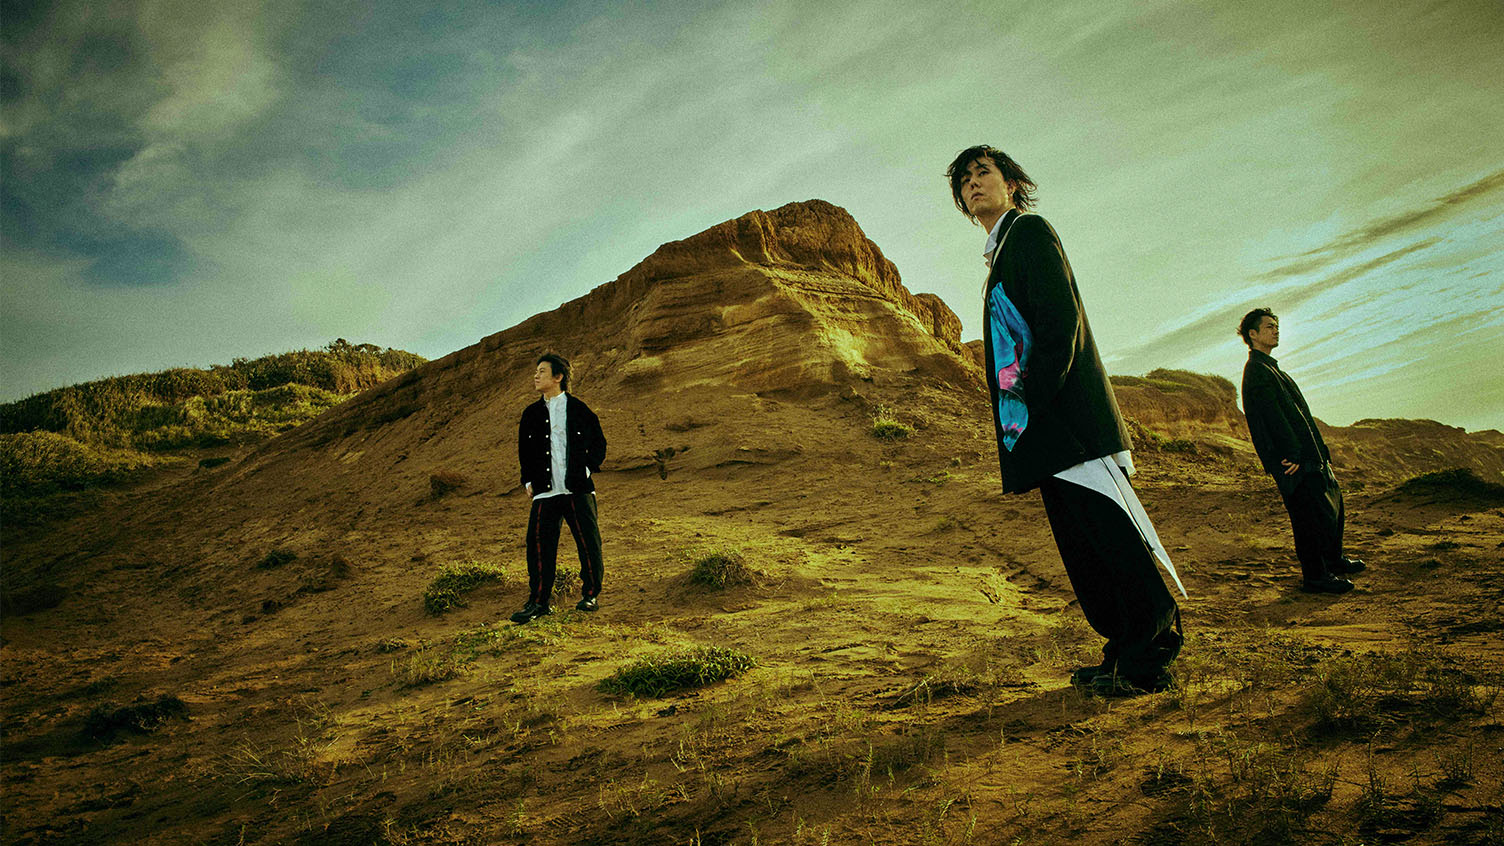 INTERVIEW: Japanese Rock Band RADWIMPS on the Sounds of Suzume and Finding the Perfect Feature on TikTok